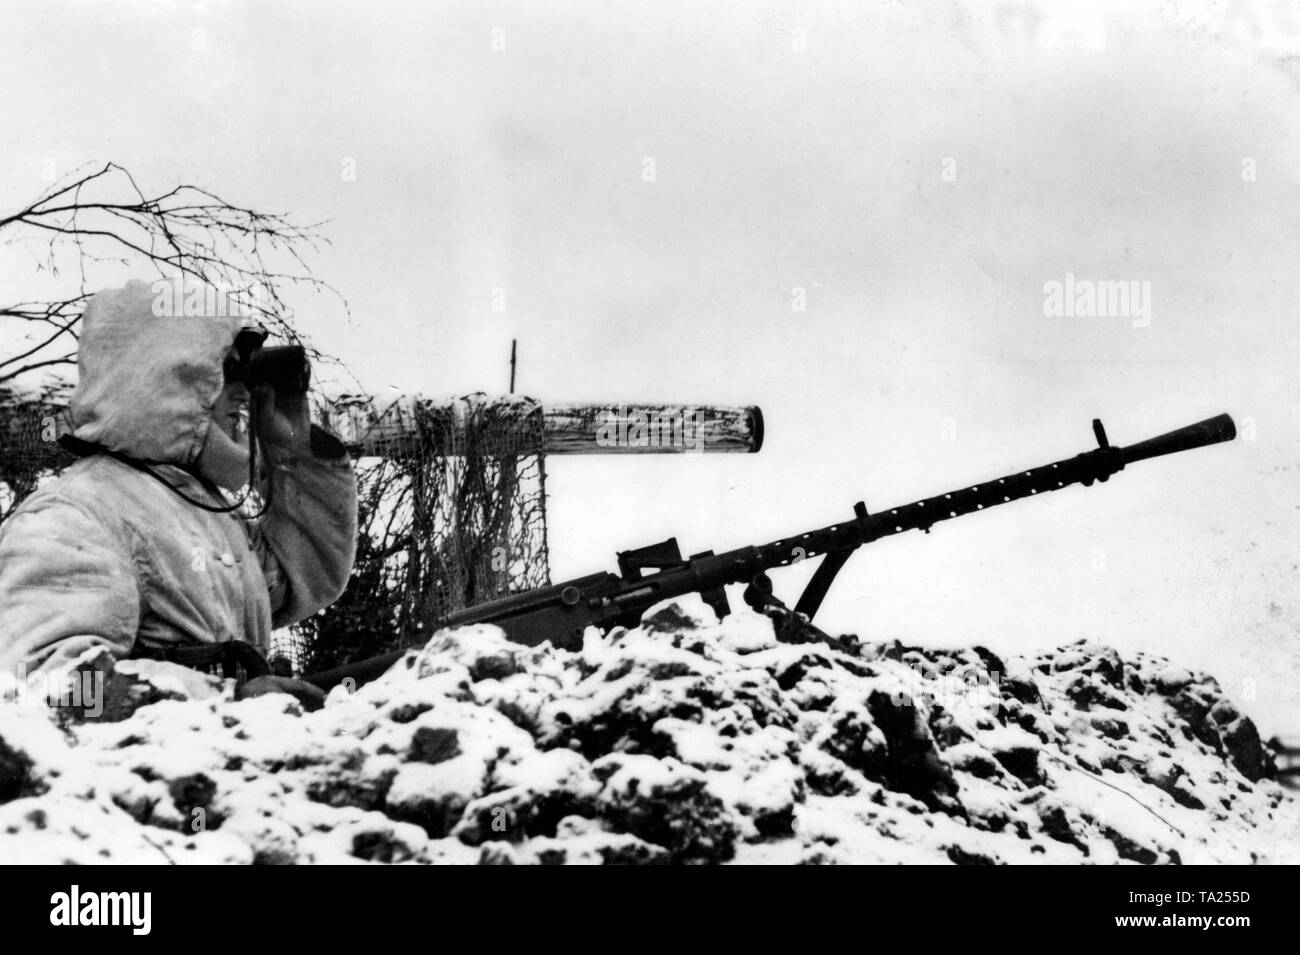 A German soldier in camouflage clothes and armed with a machine gun 34, observes the surroundings in the Newel combat area (today Belarus). Next to him, a gun barrel. Photo of the Propaganda Company (PK): war correspondent Kamp. Stock Photo